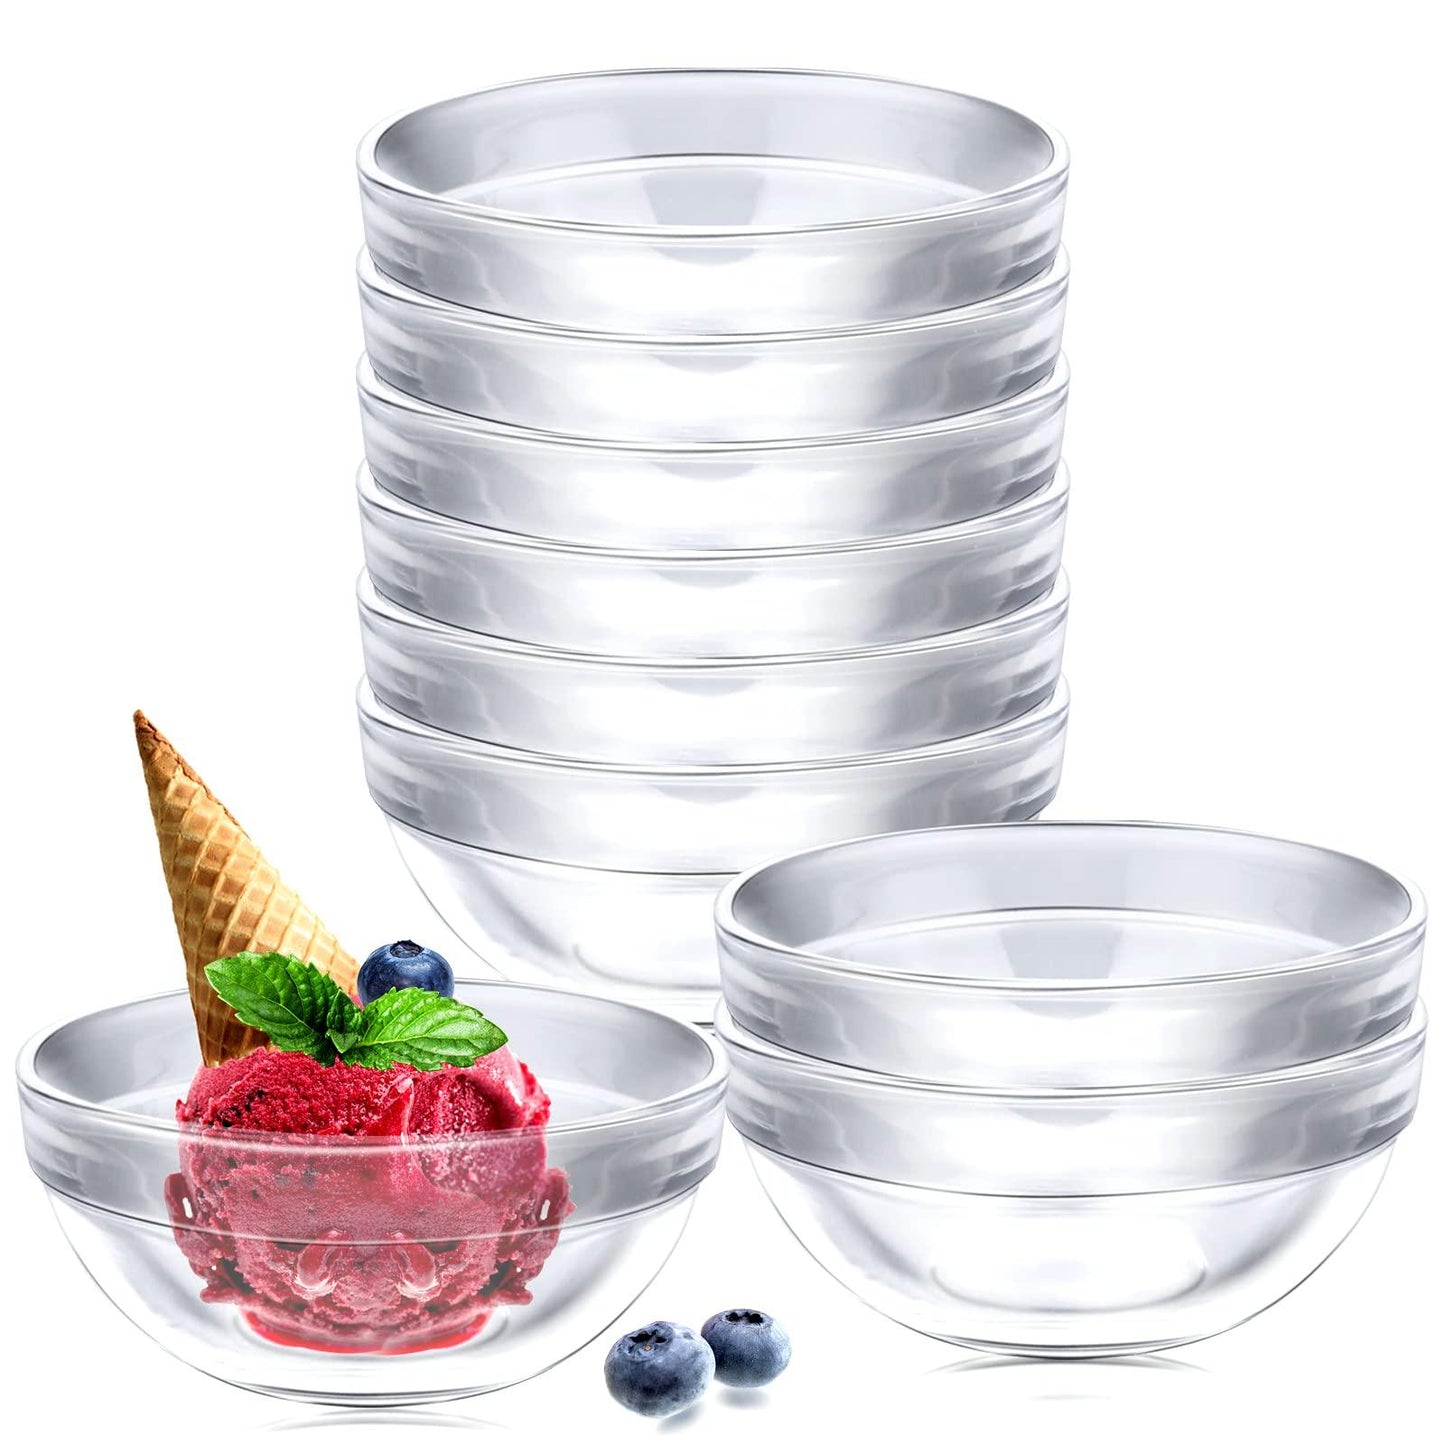 Vmiapxo 10 Pack 3.5" Small Glass Bowls, 4.7oz Stackable Glass Prep Bowls Mini Portion Dishes Serving Bowl for Dessert Snack Spice Sauce Cooking Mixing Tasting - CookCave